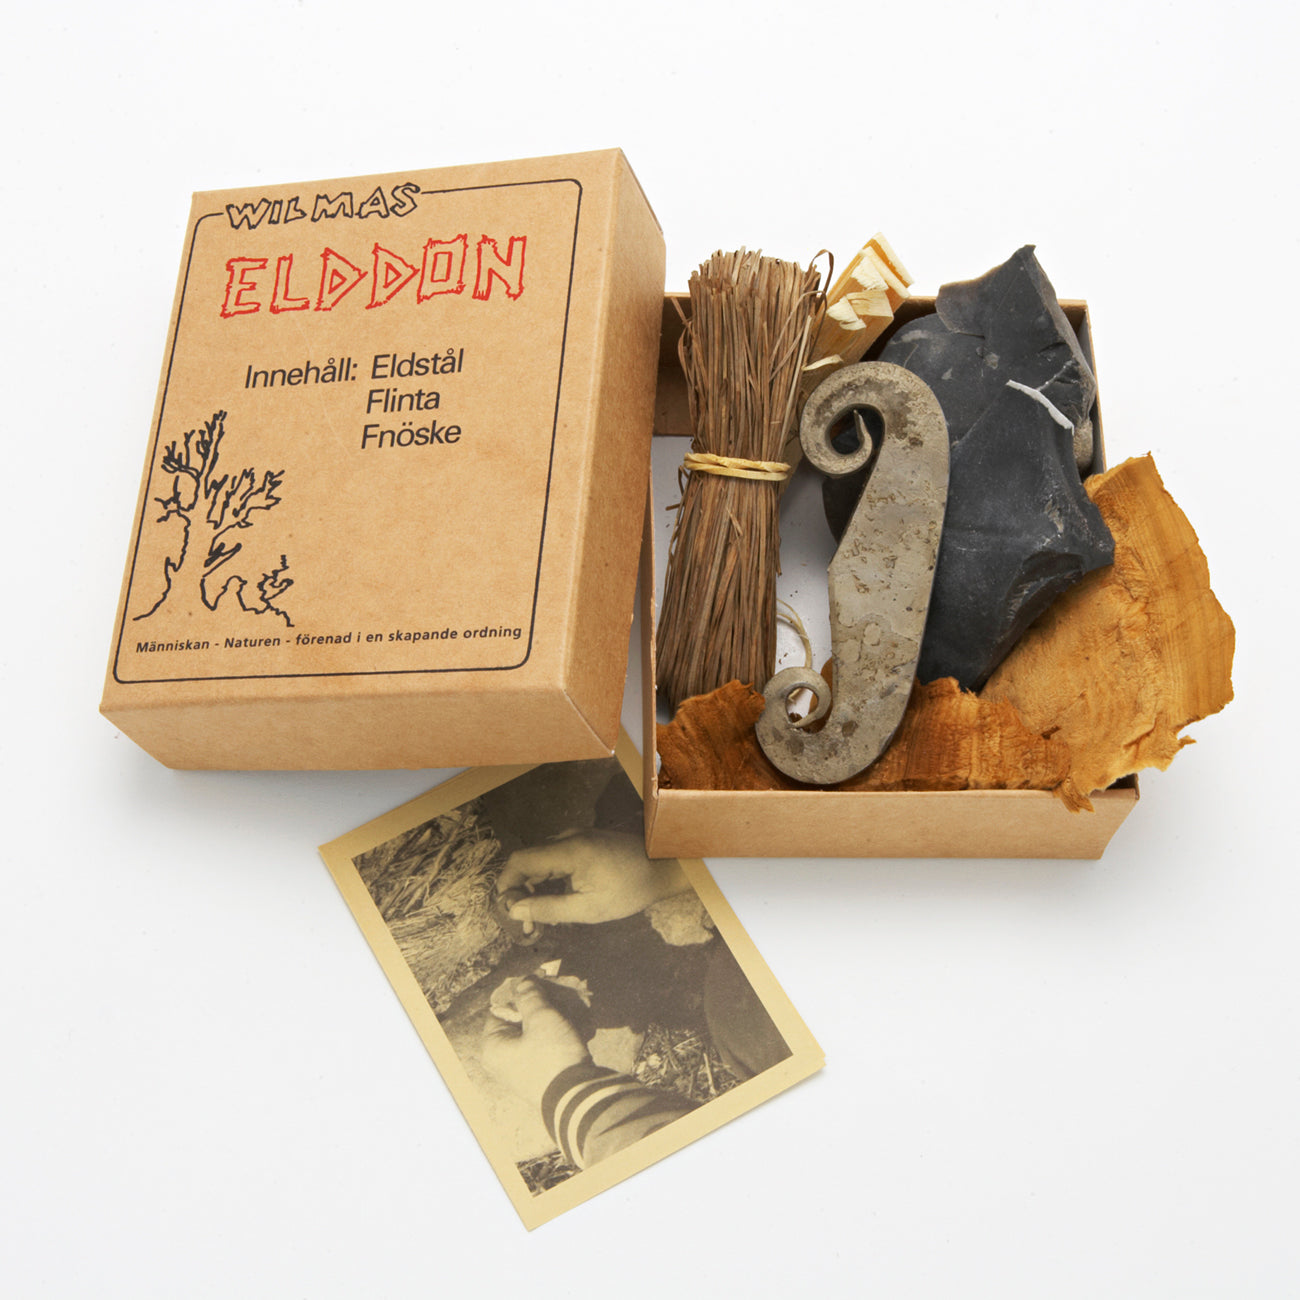 Elddon boxed firelighting kit  from Wilma in Sweden, including a flint and steel and tinder